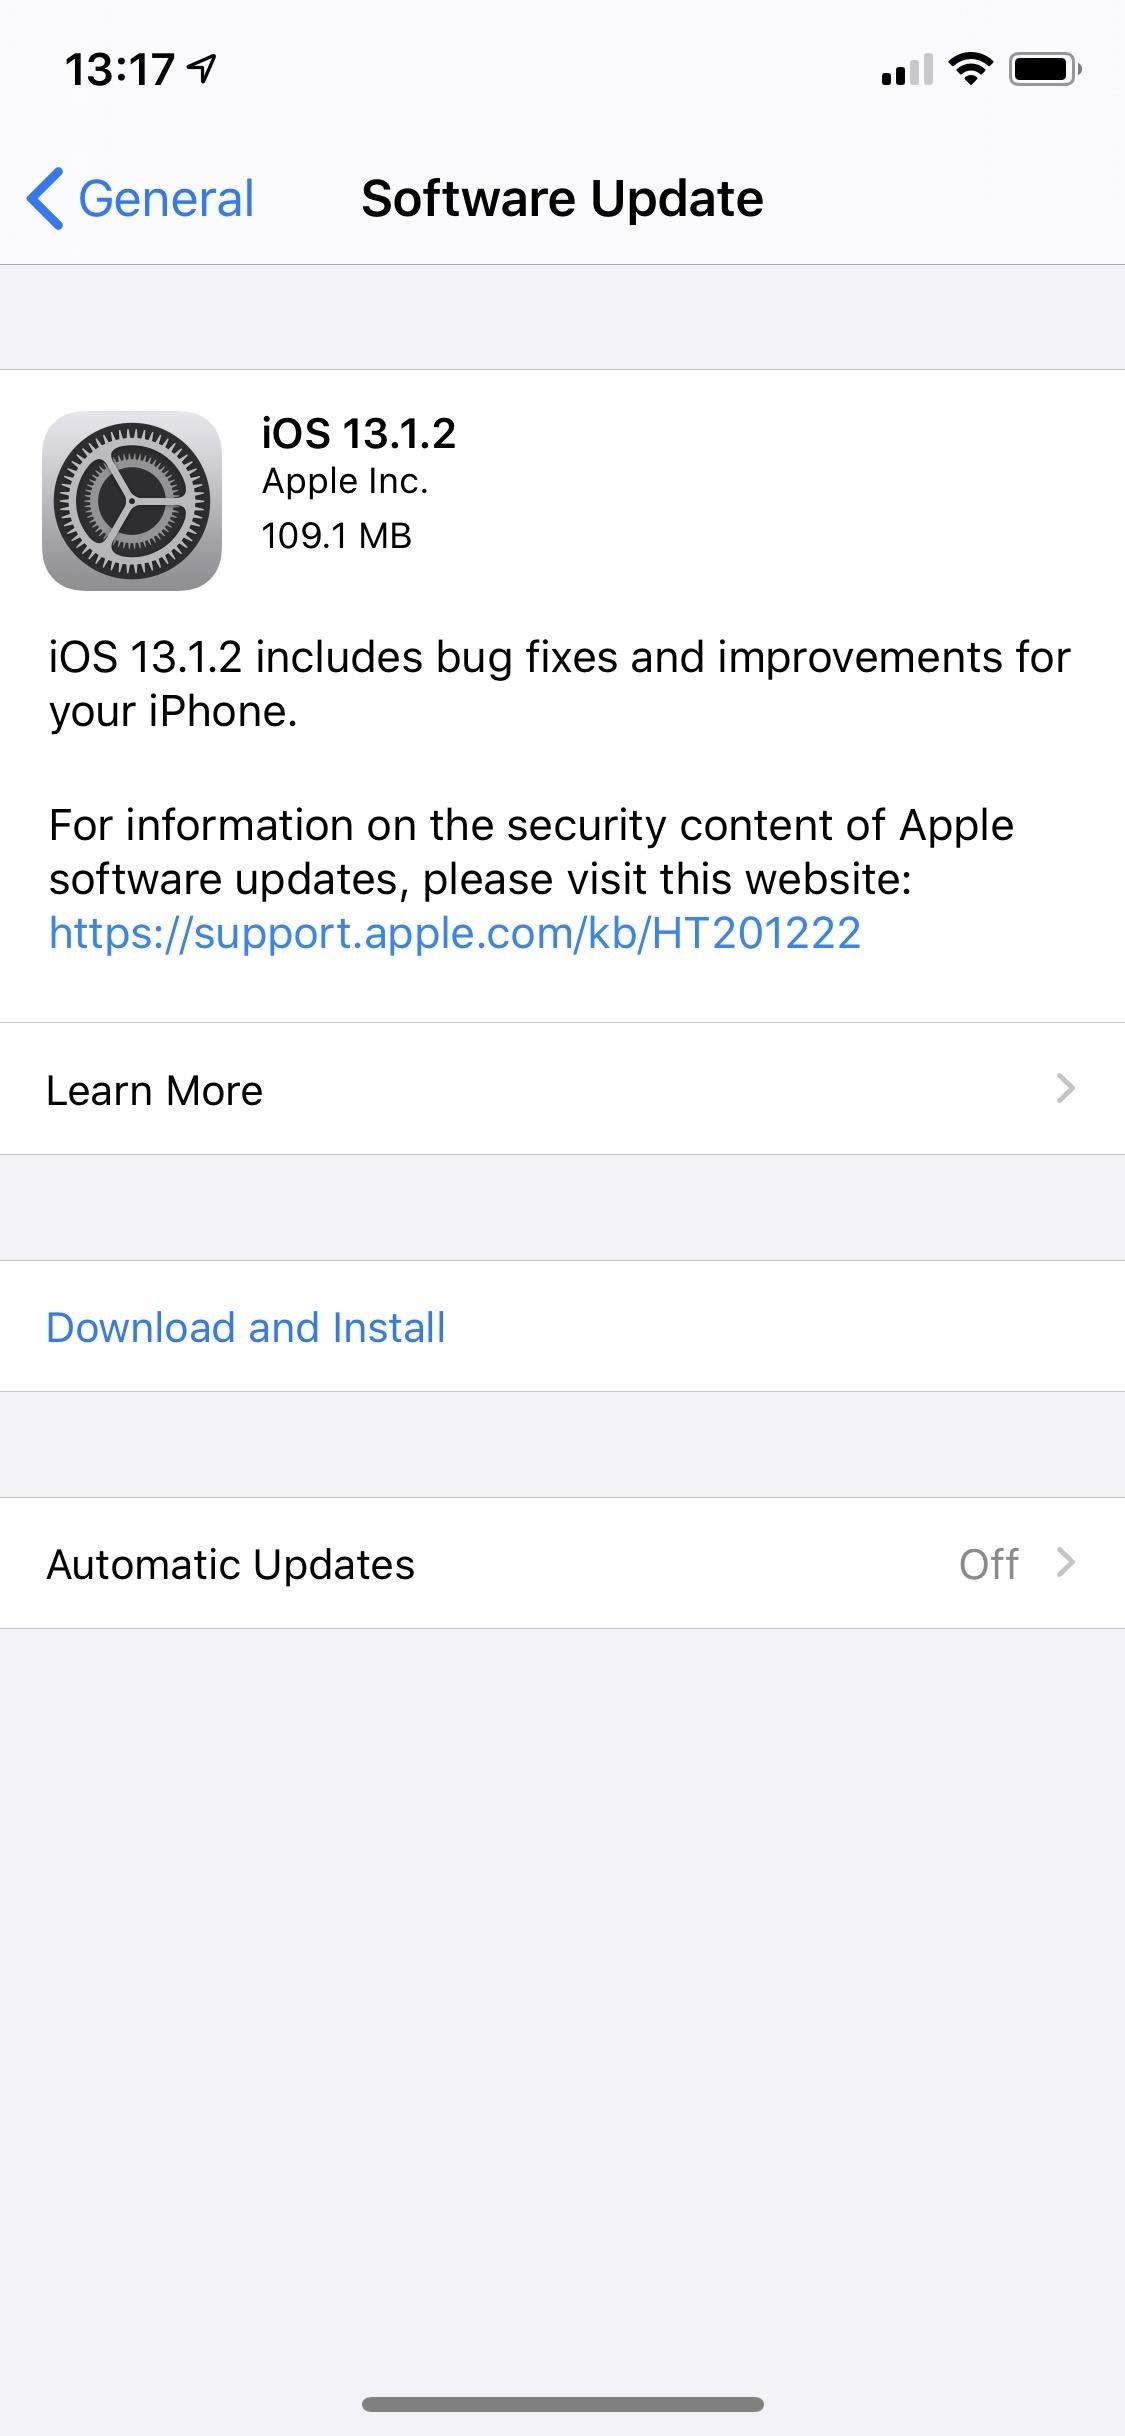 Apple Just Released iOS 13.1.2, Includes Fixes for Camera, Flashlight, iCloud Backup & More